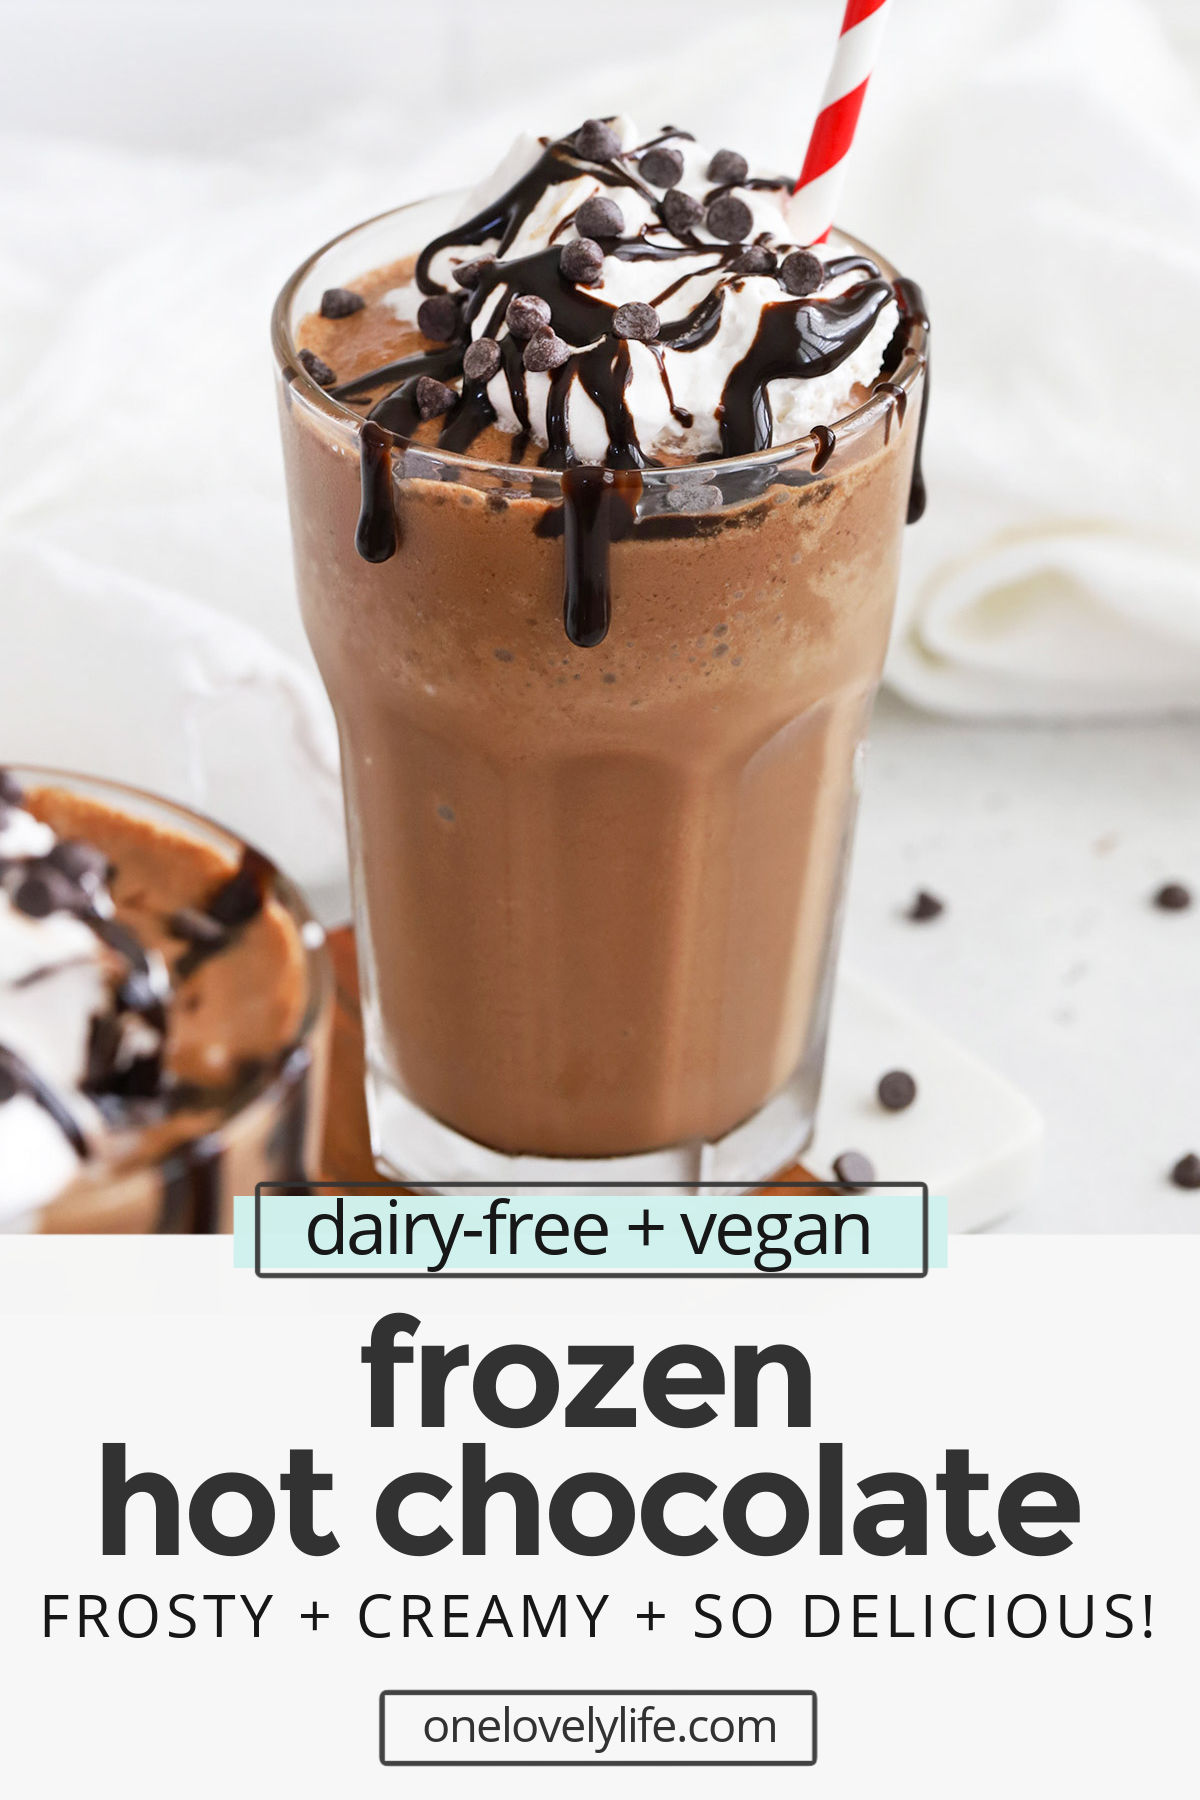 Vegan Frozen Hot Chocolate - This dairy-free frozen hot chocolate is frost, creamy, and so delicious with a swirl of whipped cream and some chocolate on top. You won't want to miss it! // Paleo Frozen Hot Chocolate // Healthy Frozen Hot Chocolate recipe #frozenhotchocolate #paleo #vegan #dairyfree #glutenfree